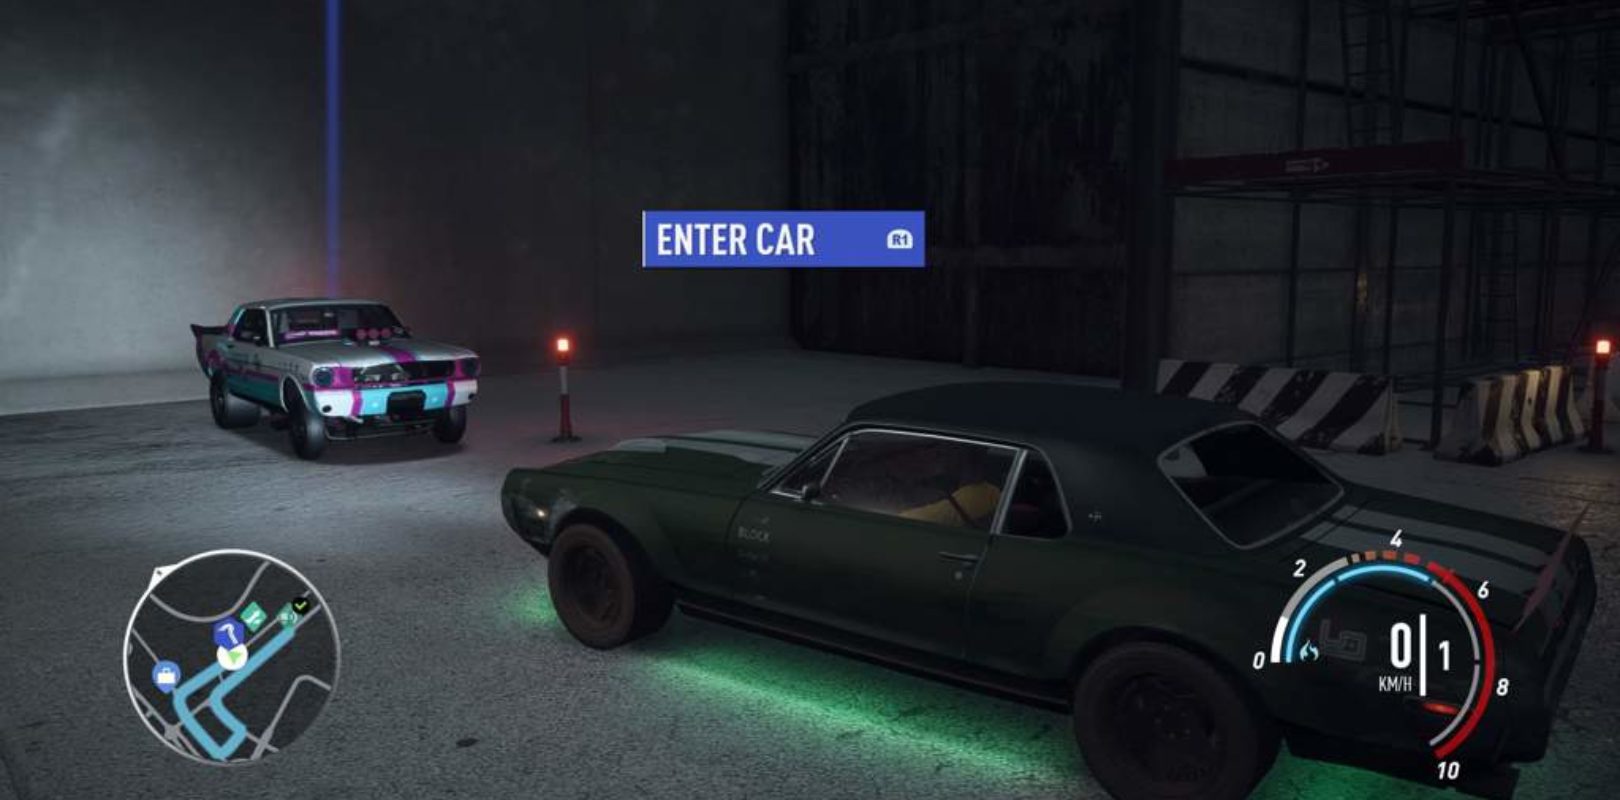 abandoned car for nfs payback march 19 2019